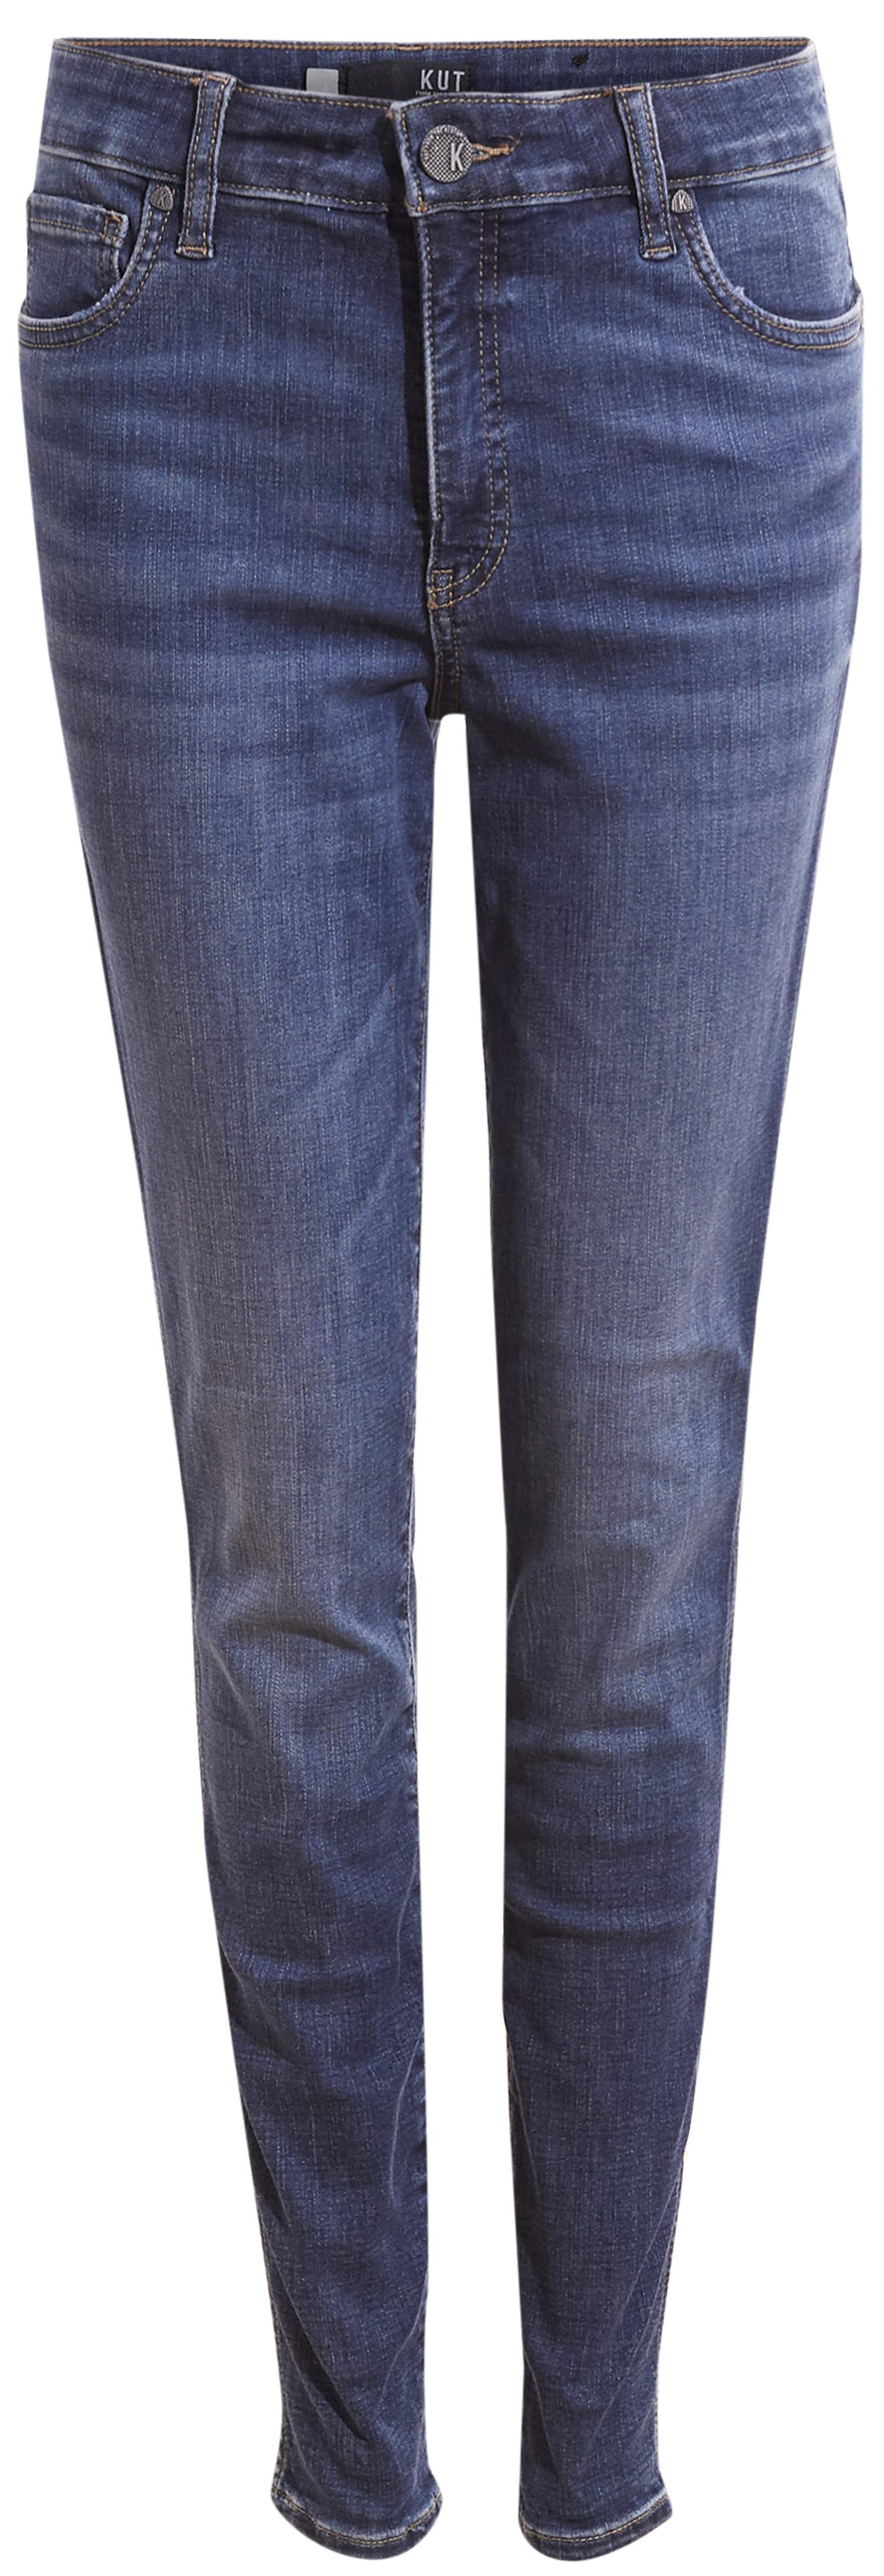 KUT from the Kloth High Rise Fab Ab Denim